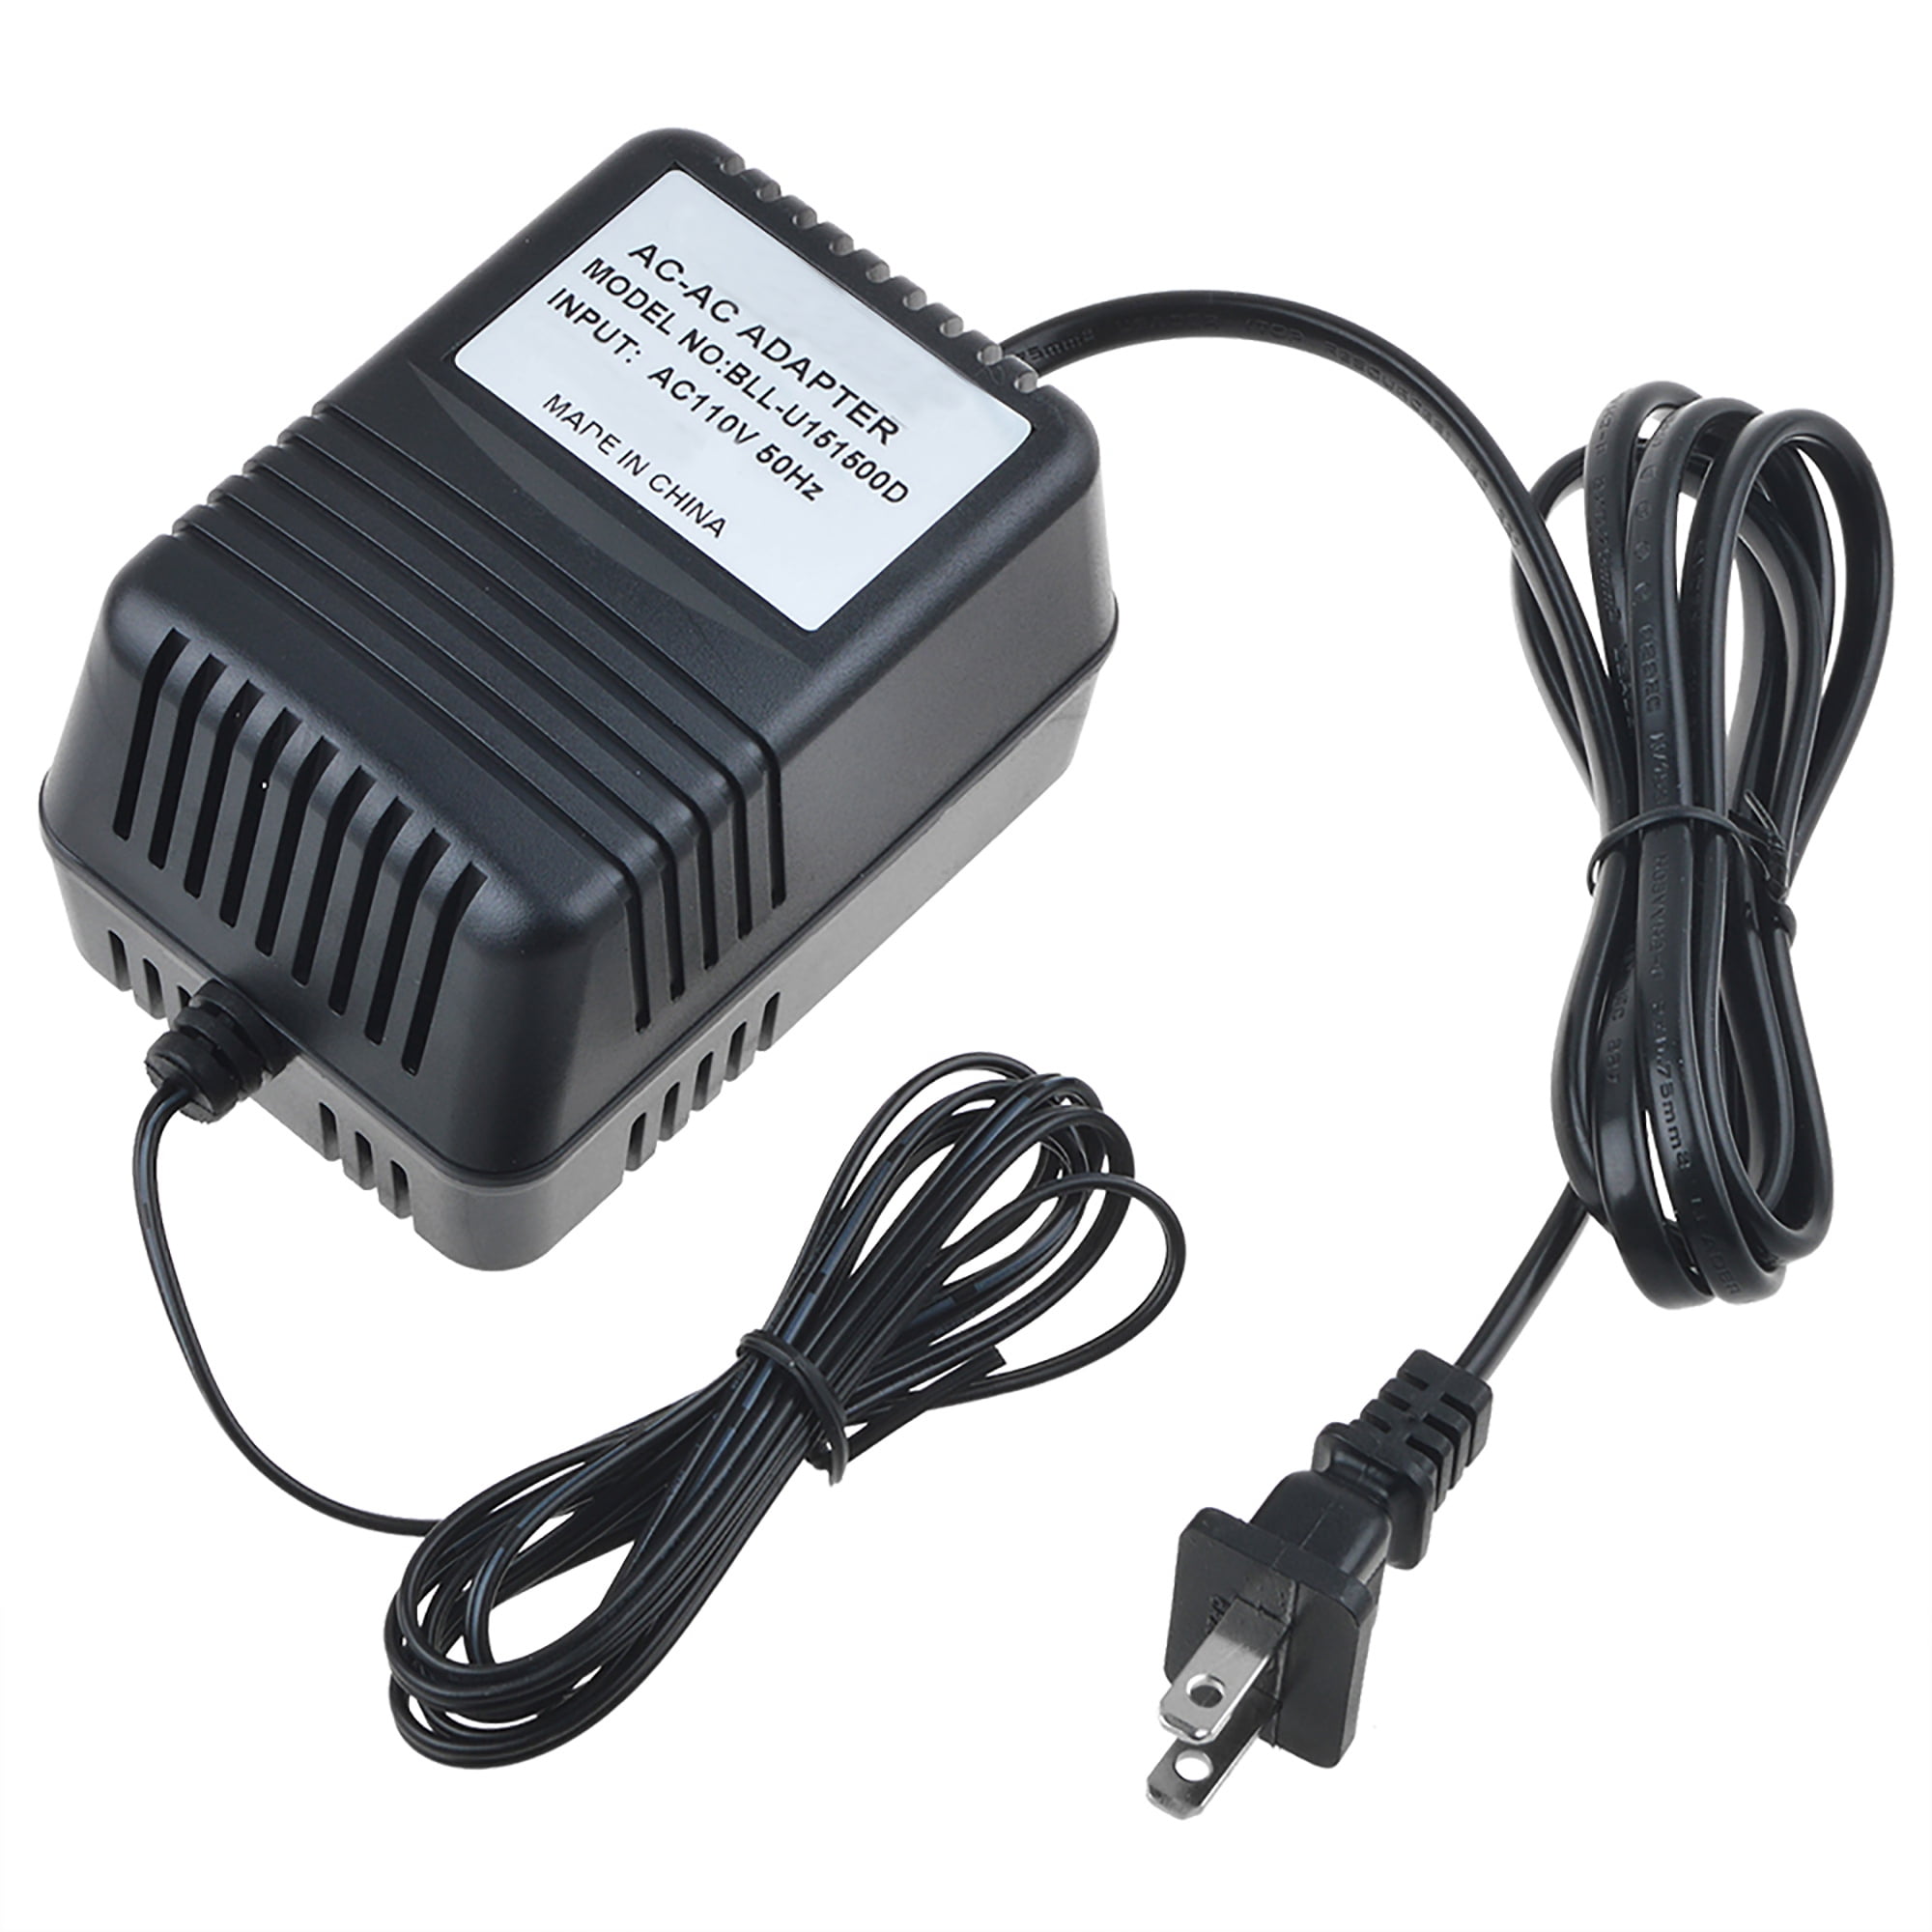 with AC Output 9VAC 9.6 Volt Cordless Drive B&D BD Power Supply Cord Battery Charger Mains PSU AC Adapter for Black & Decker Drill GC9600 GC960 GC9601 CD960 90500925-01 9.6V 